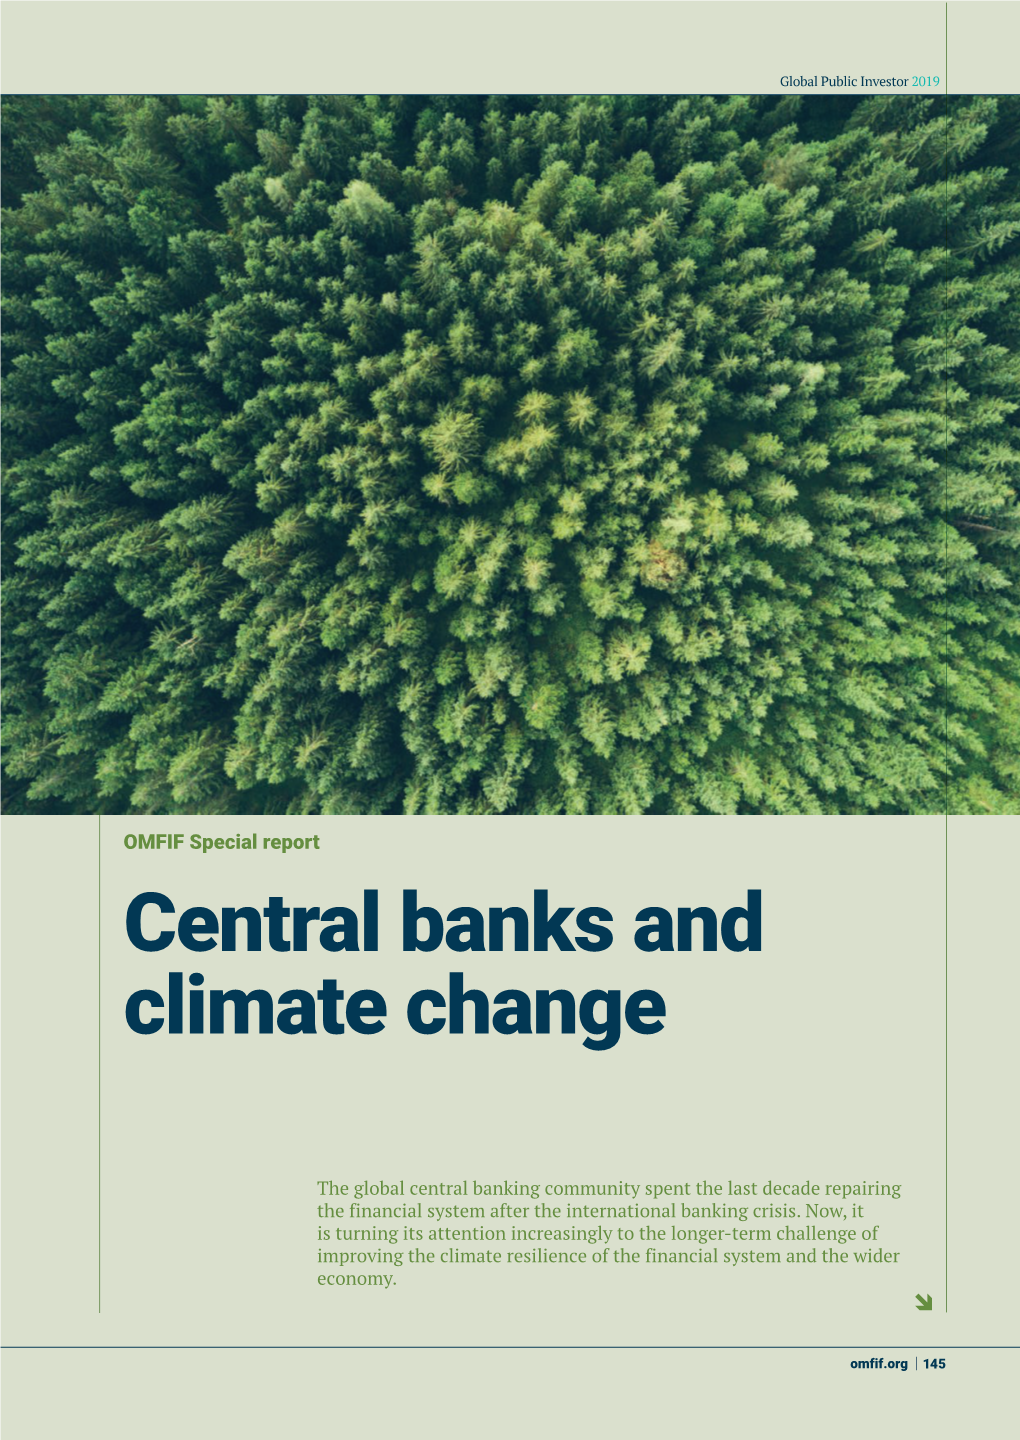 Entral Banks and Climate Change